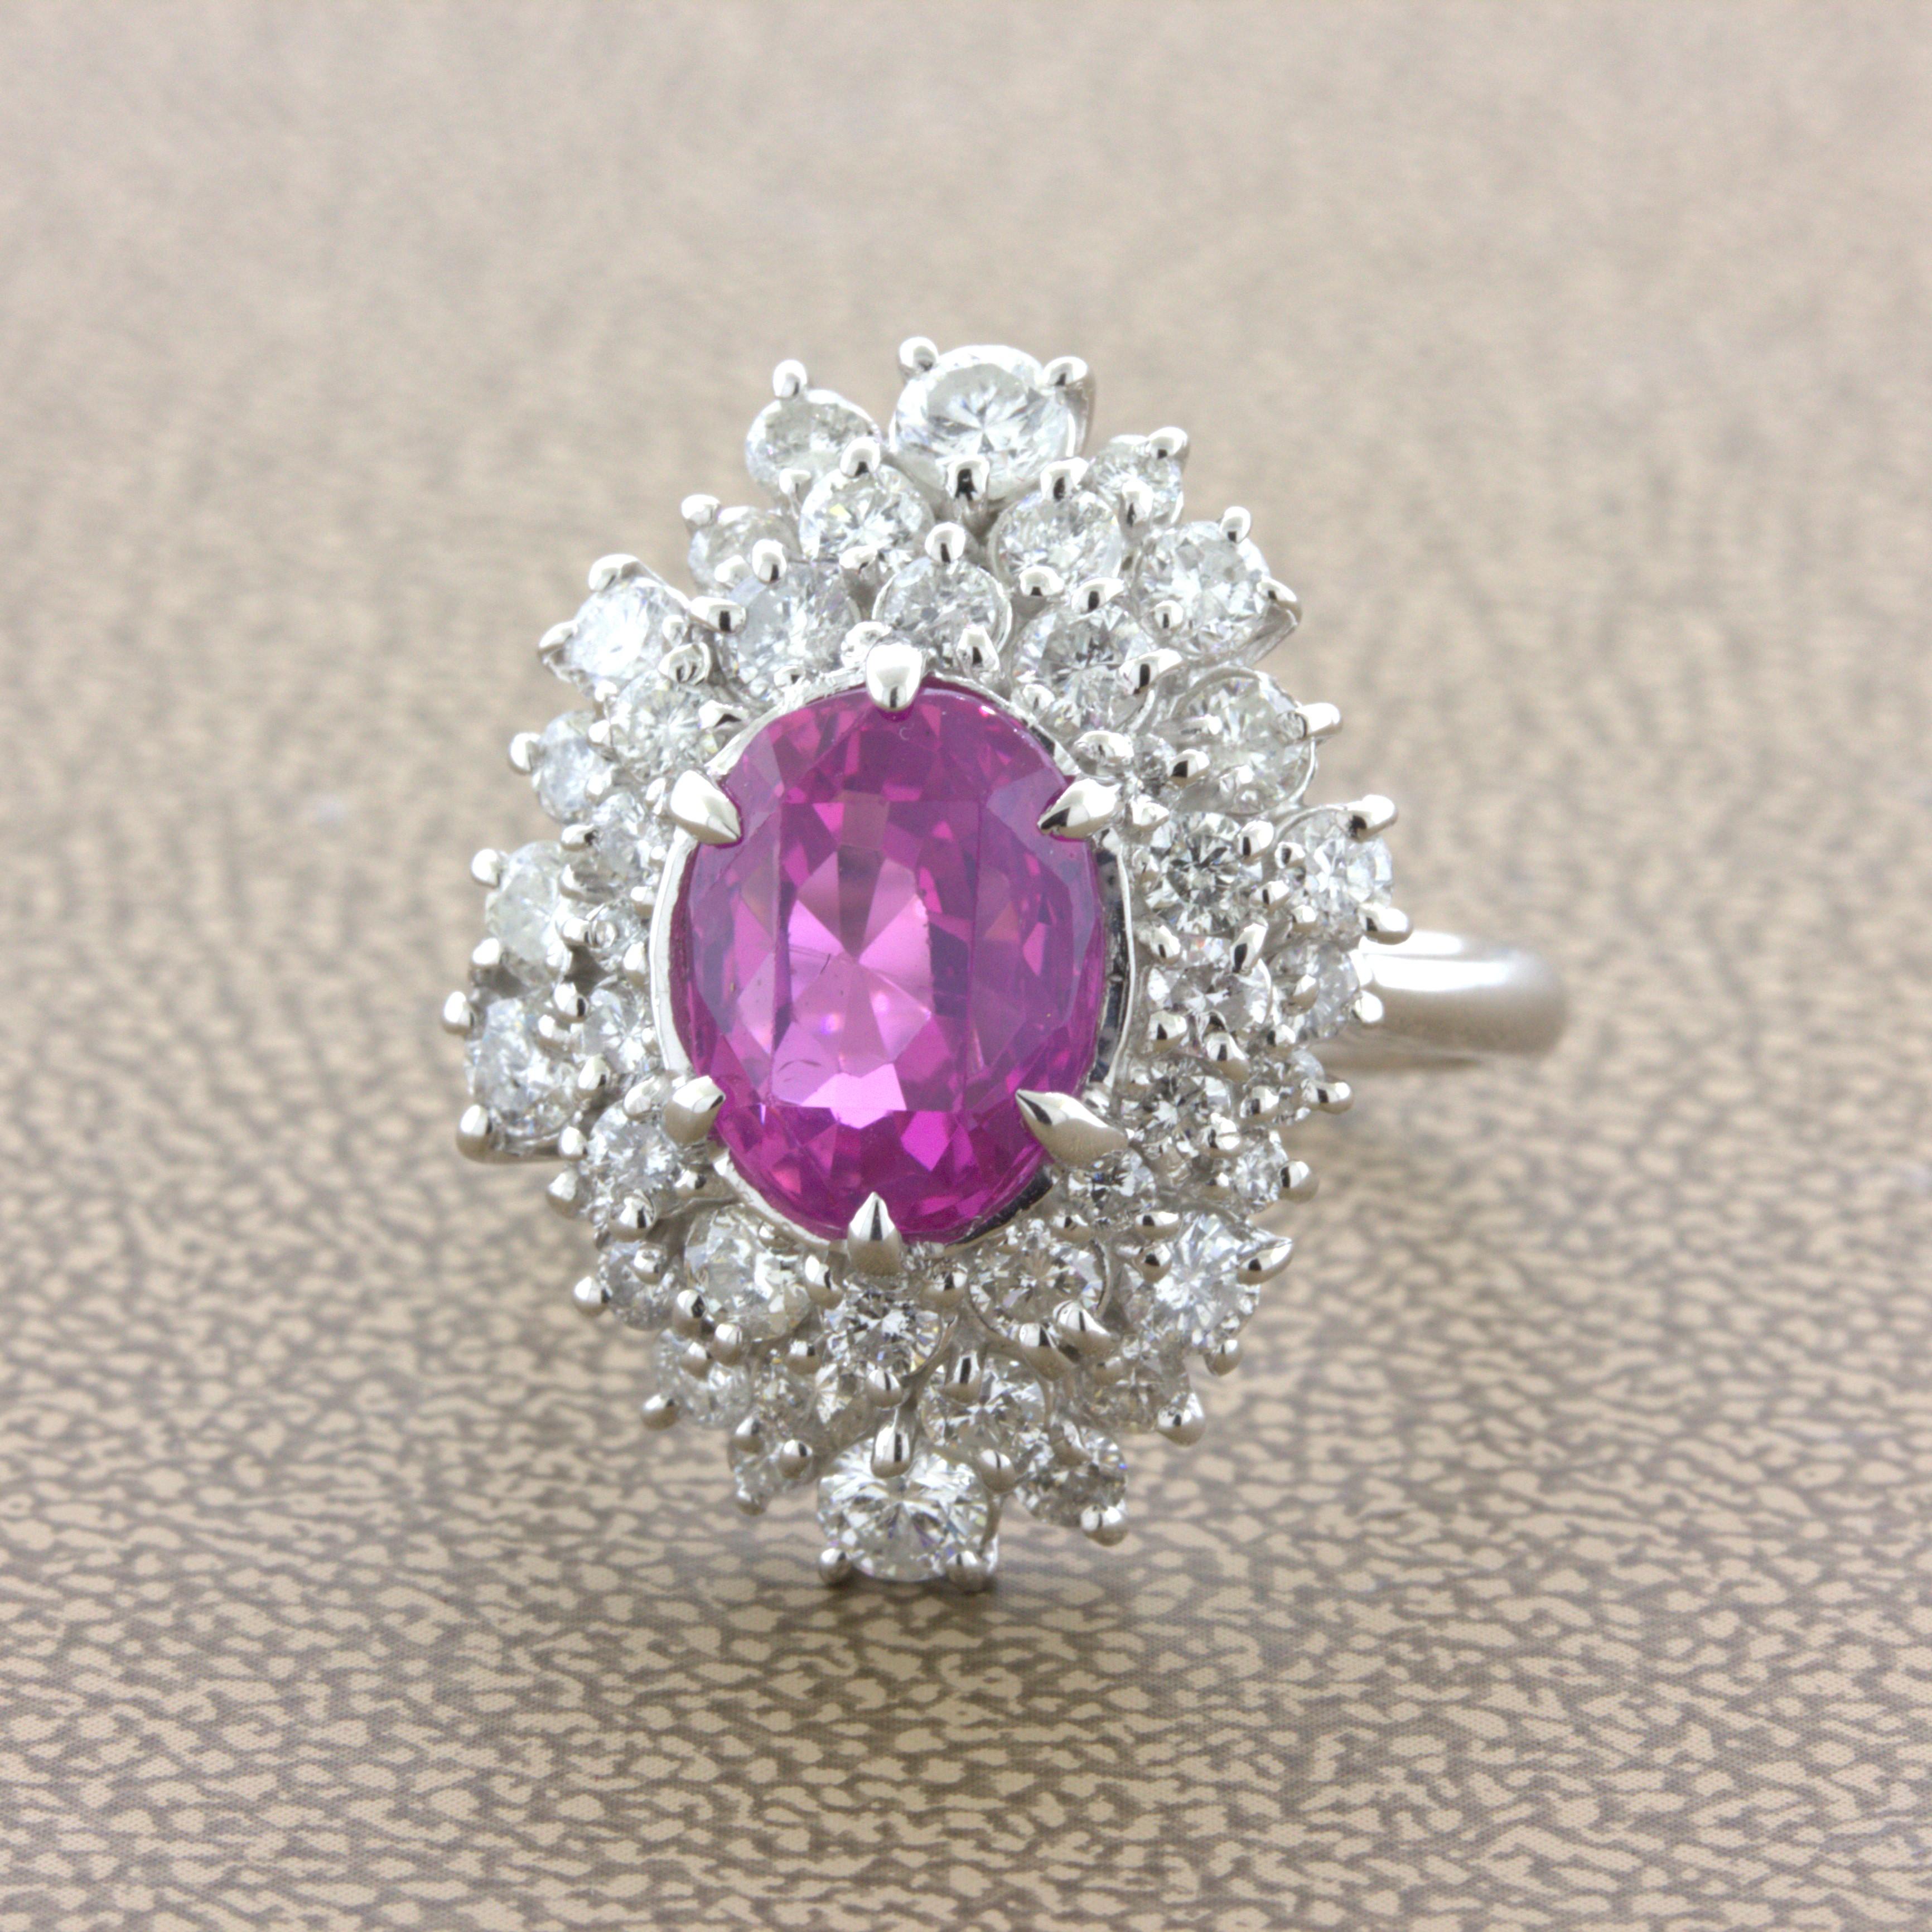 Oval Cut 4.25 Carat “Barbie Pink” Sapphire Diamond Platinum Ring, GIA Certified For Sale